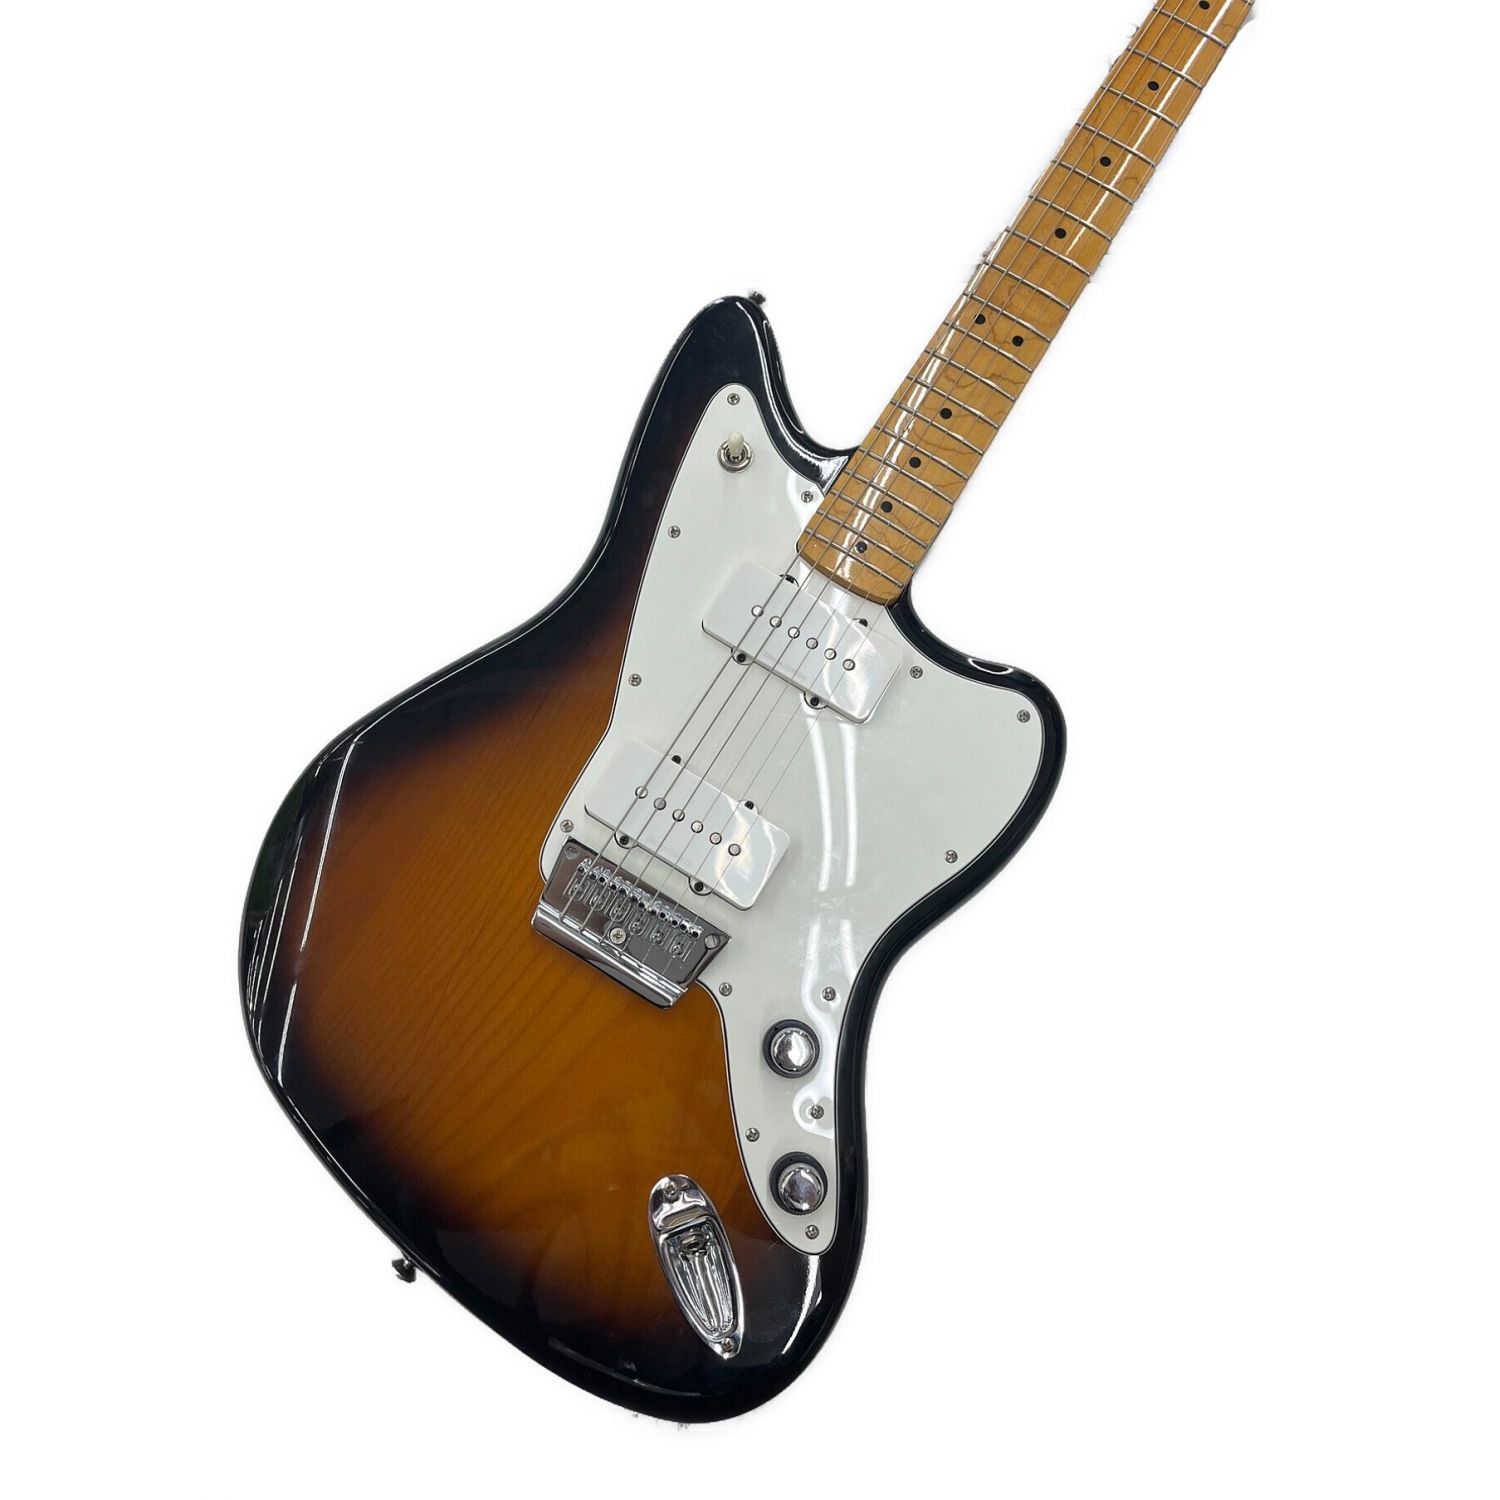 Squier by FENDER (スクワイア バイ フェンダー) エレキギター DUNCAN